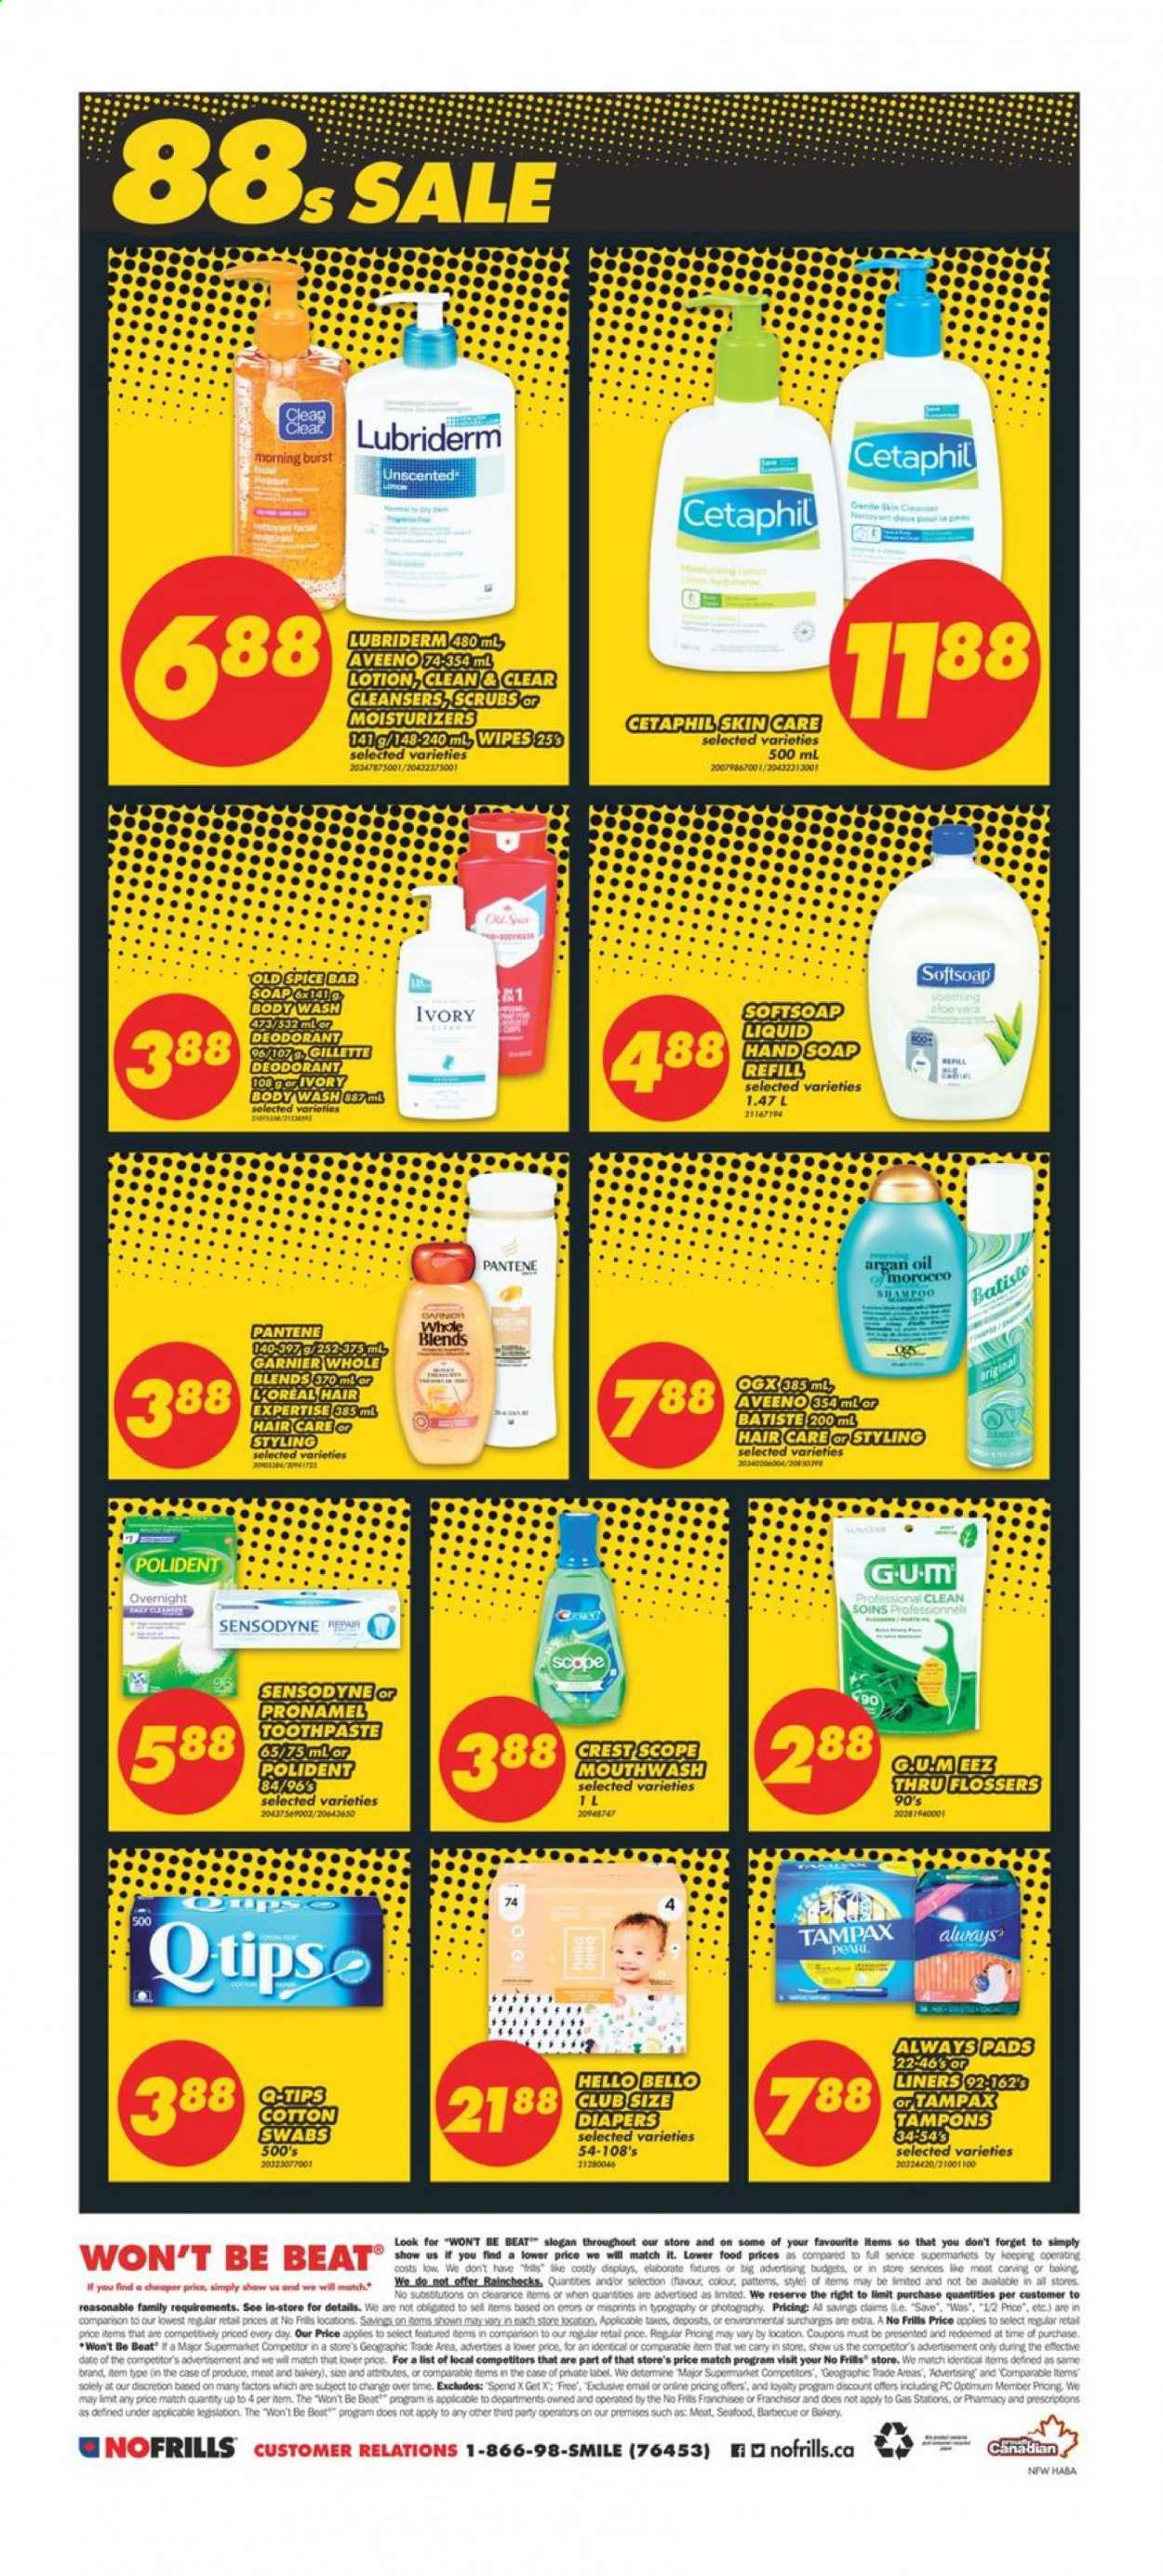 thumbnail - No Frills Flyer - January 08, 2021 - January 14, 2021 - Sales products - seafood, spice, wipes, nappies, Aveeno, body wash, Softsoap, hand soap, soap, toothpaste, mouthwash, Polident, Crest, Always pads, tampons, L’Oréal, moisturizer, Clean & Clear, OGX, body lotion, Lubriderm, anti-perspirant, Optimum, argan oil, Garnier, Tampax, Pantene, Old Spice, Sensodyne, deodorant. Page 8.